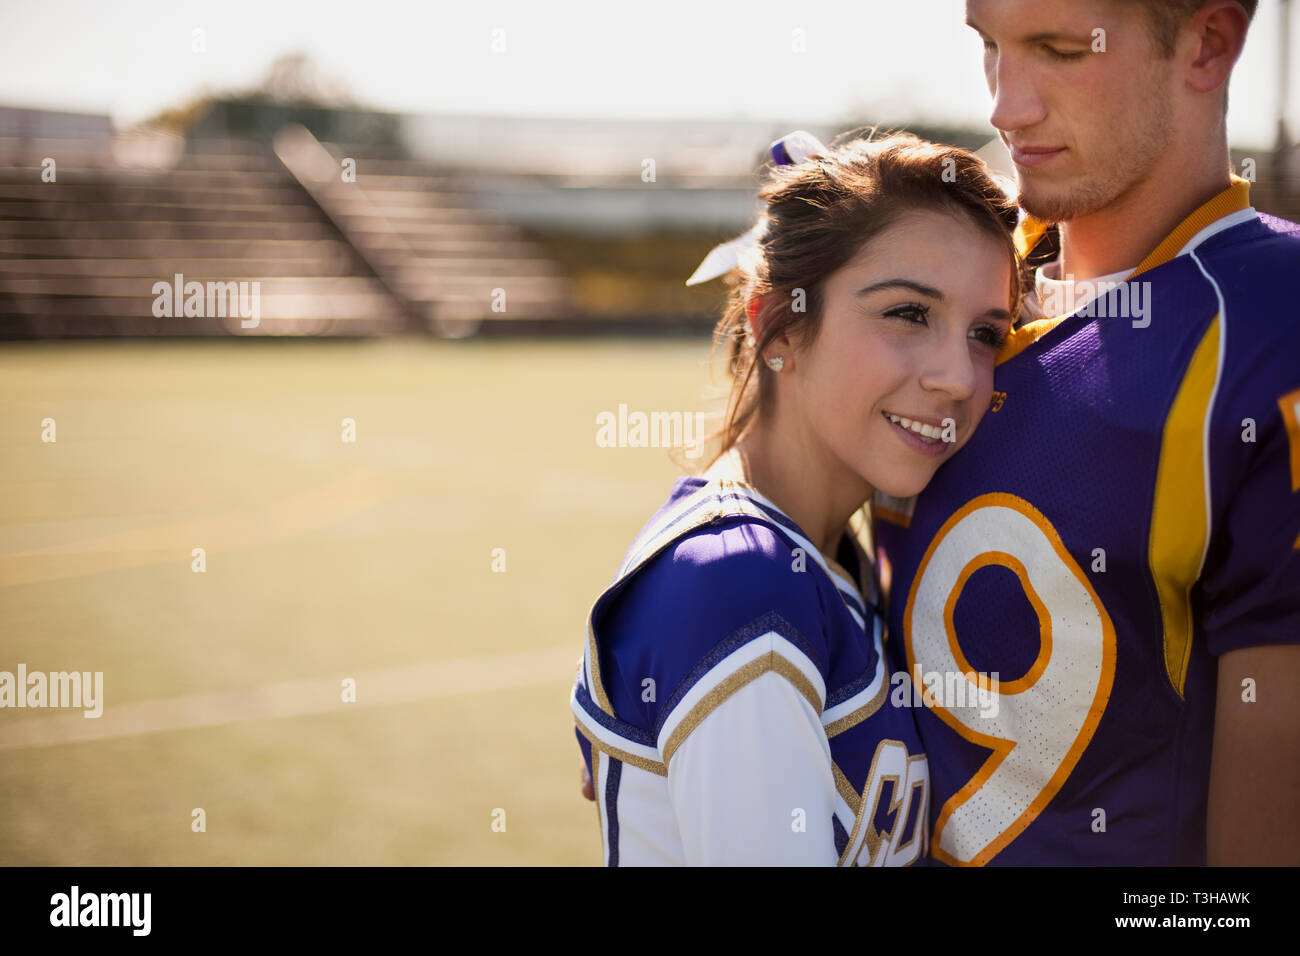 Cheerleader snuggled into football player's chest. Stock Photo